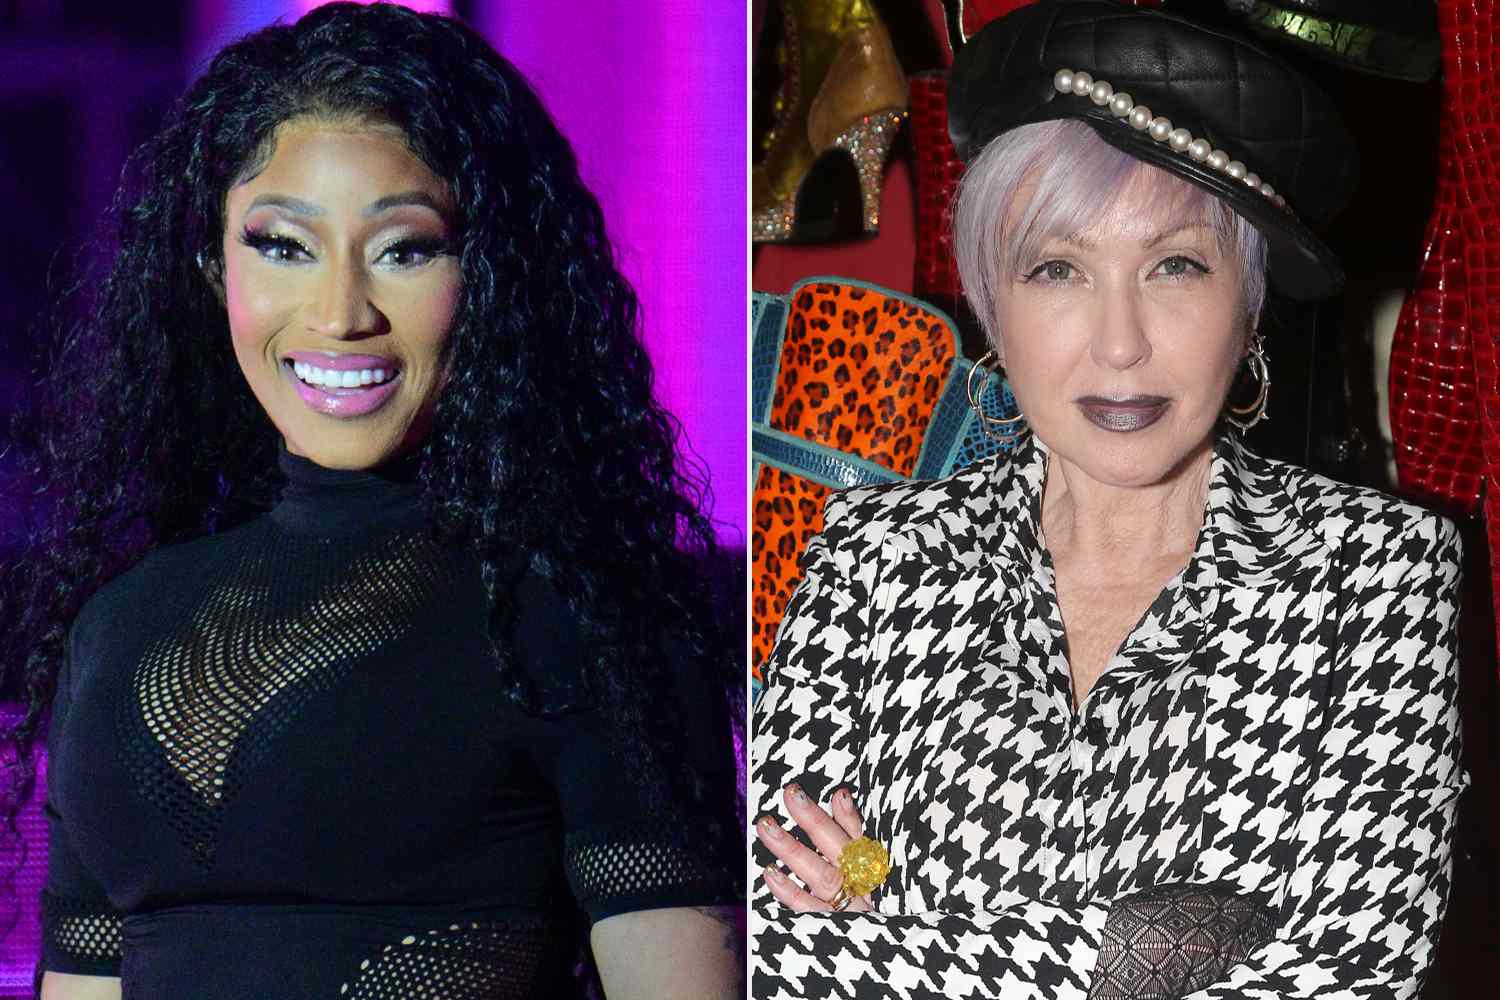 Nicki Minaj Brings Out 'Icon' Cyndi Lauper as Surprise Guest at Brooklyn Concert to Duet 'Pink Friday Girls'